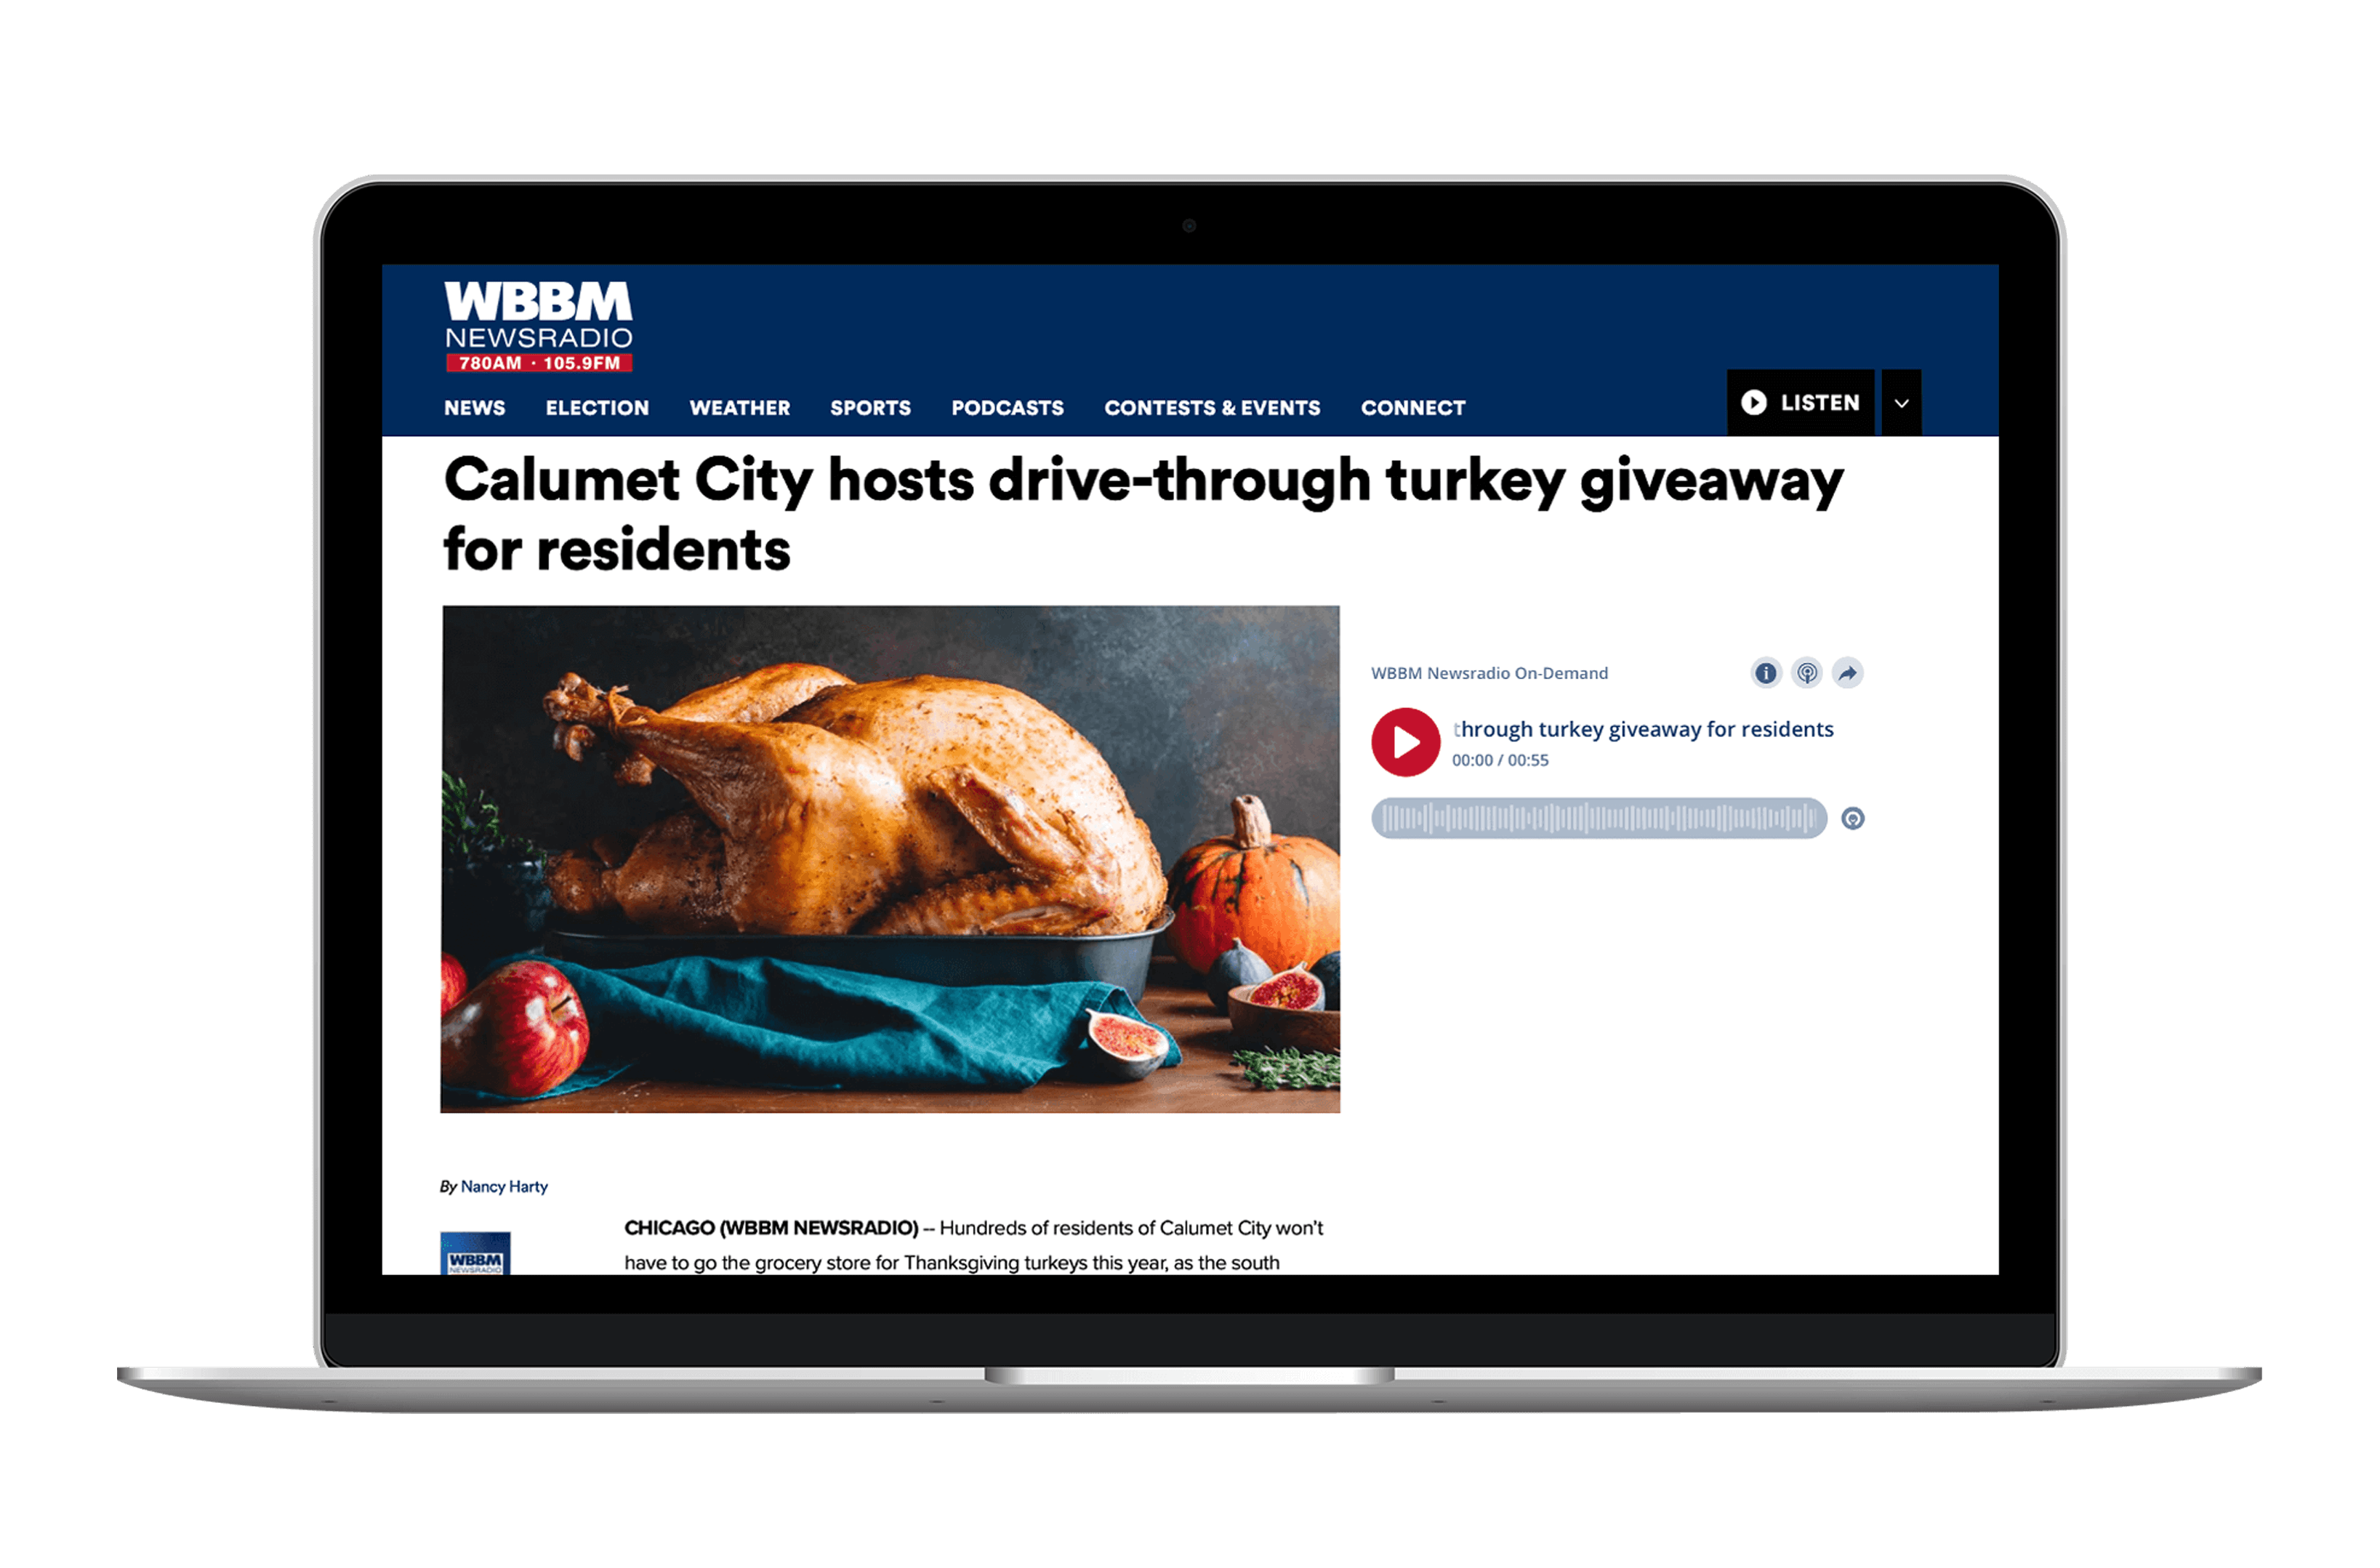 Calumet City hosts drive-through turkey giveaway for residents